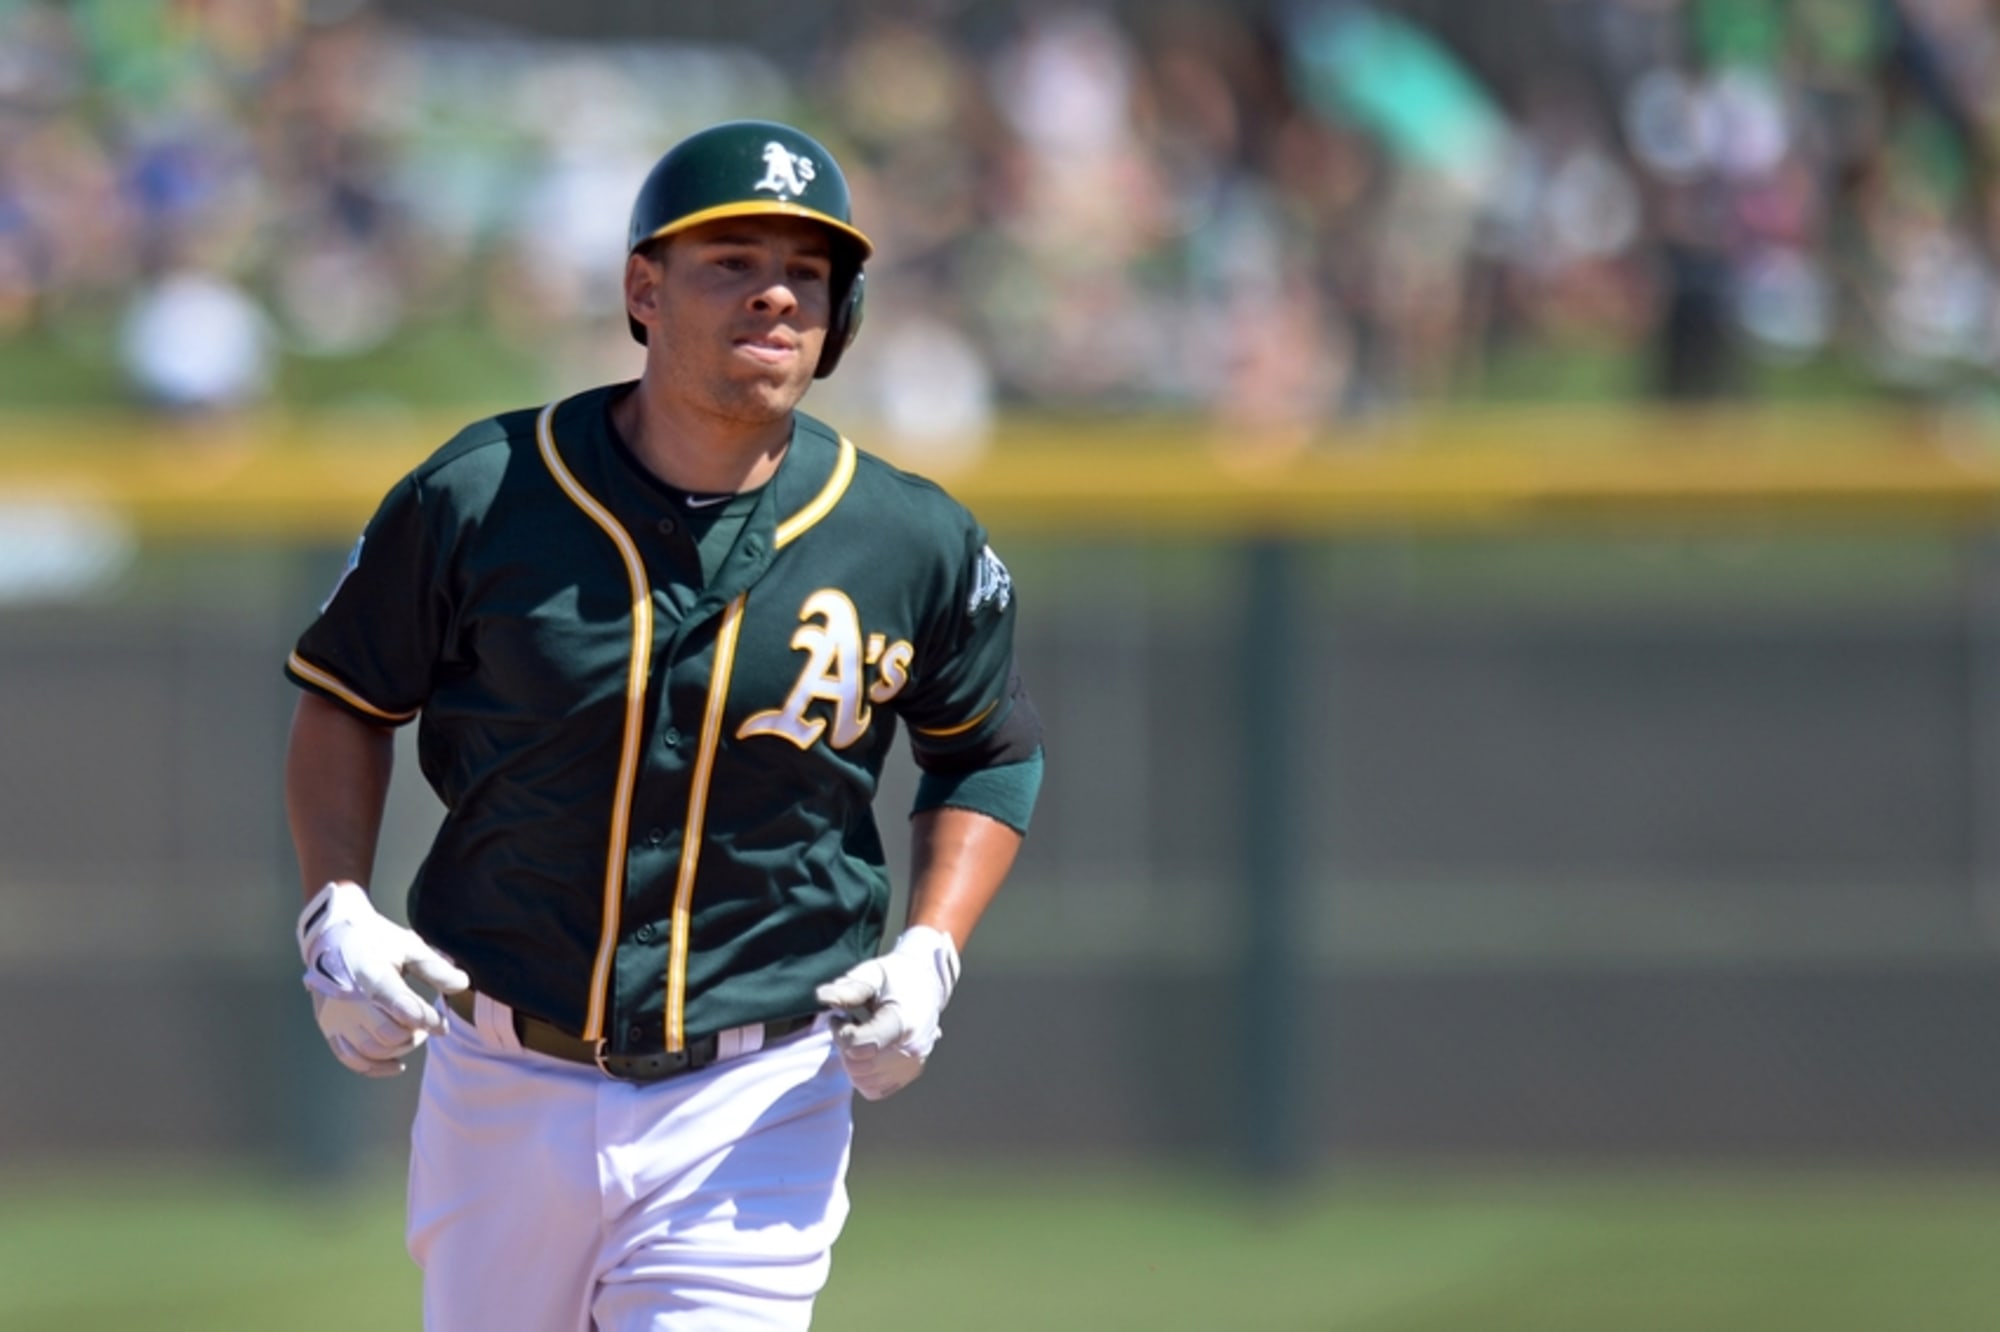 Billy Butler injured in altercation with Danny Valencia - Sports